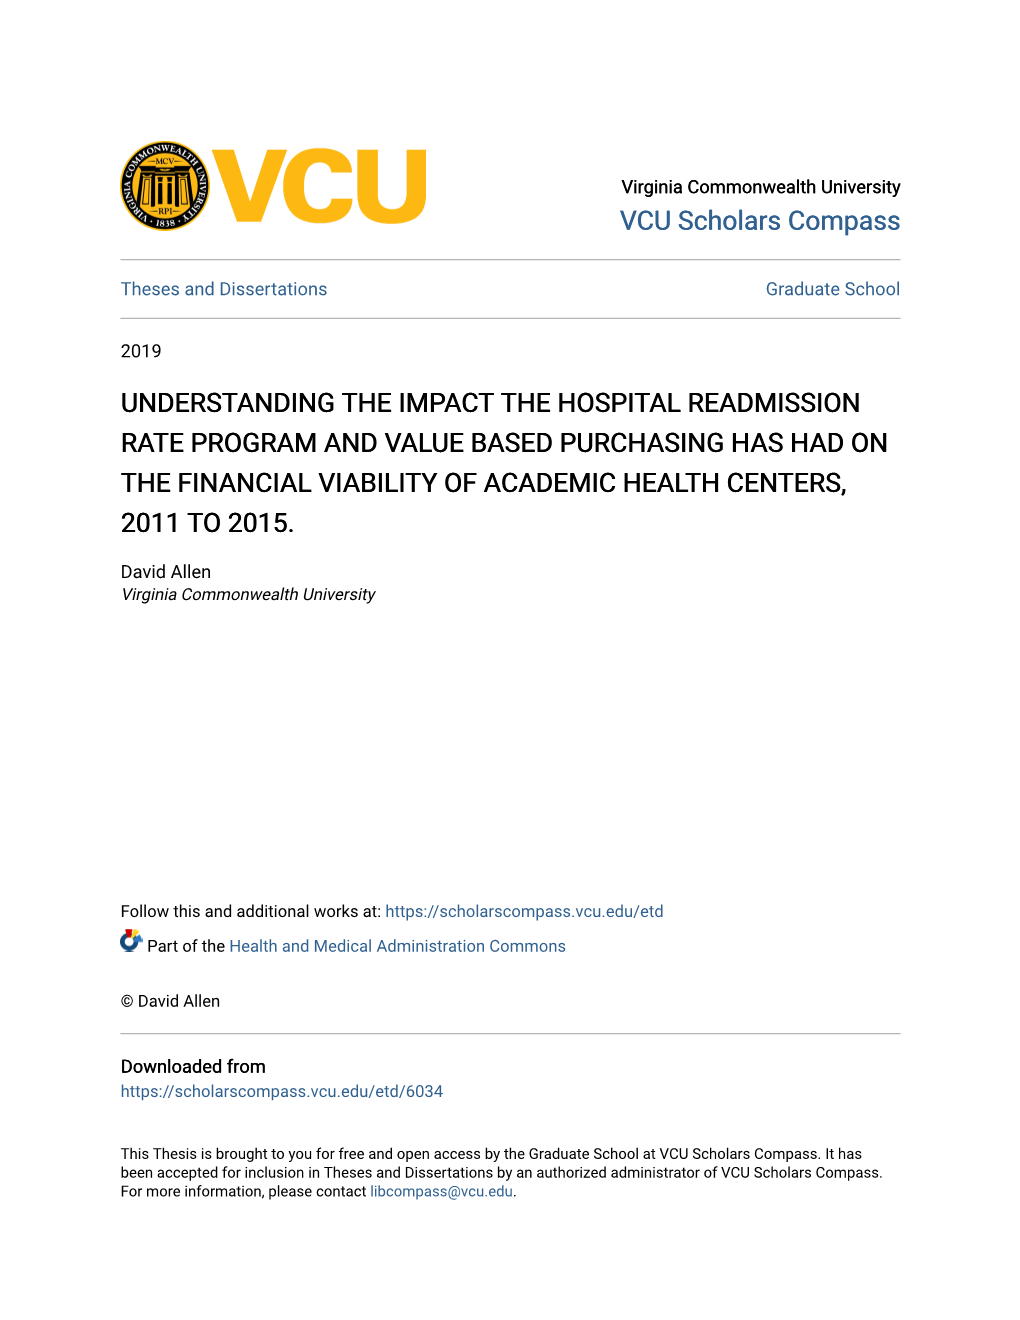 Understanding the Impact the Hospital Readmission Rate Program and Value Based Purchasing Has Had on the Financial Viability of Academic Health Centers, 2011 to 2015